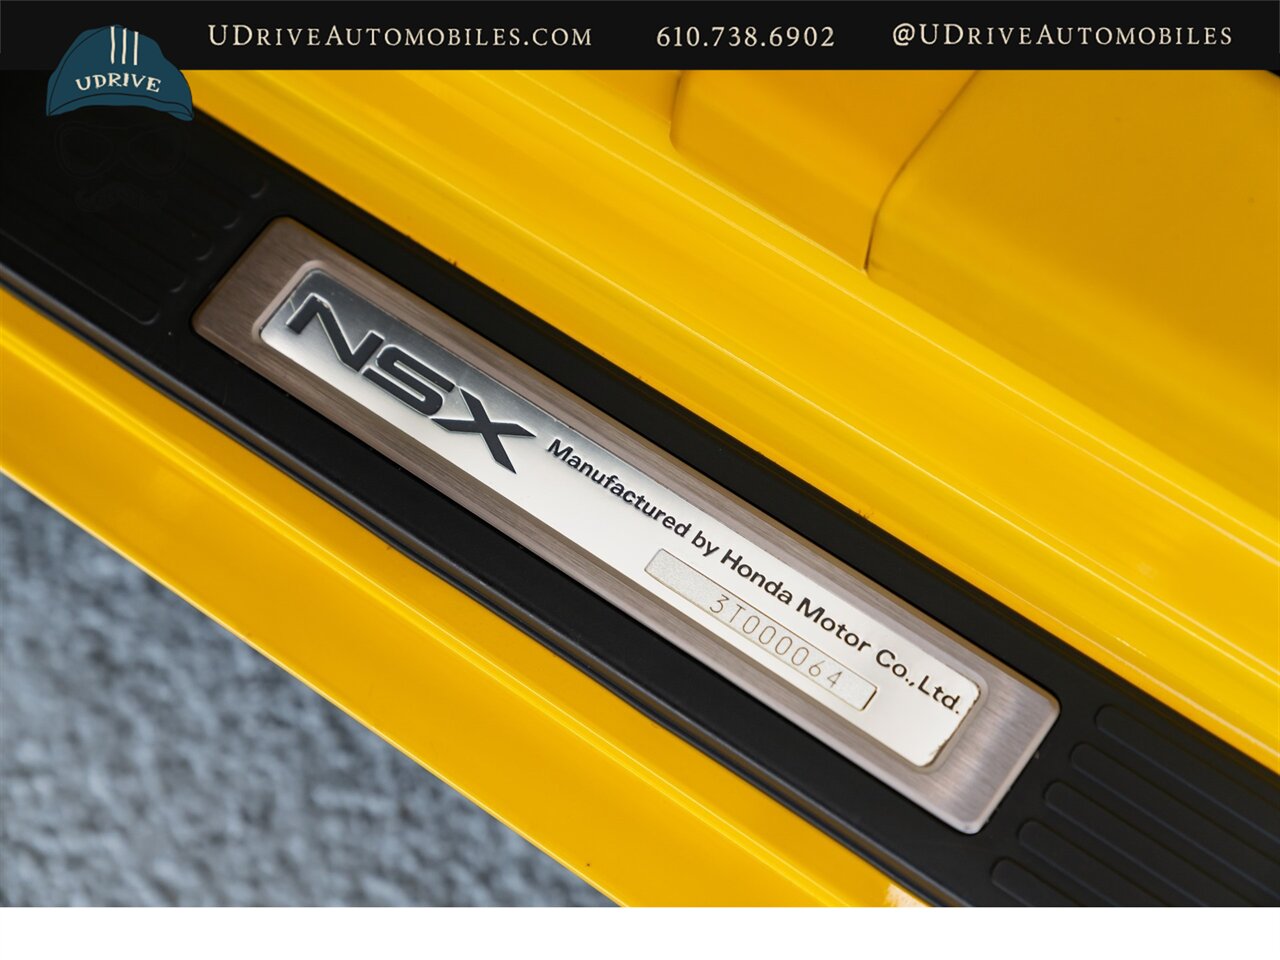 2003 Acura NSX NSX-T  Spa Yellow over Yellow Lthr 1 of 13 Produced - Photo 32 - West Chester, PA 19382